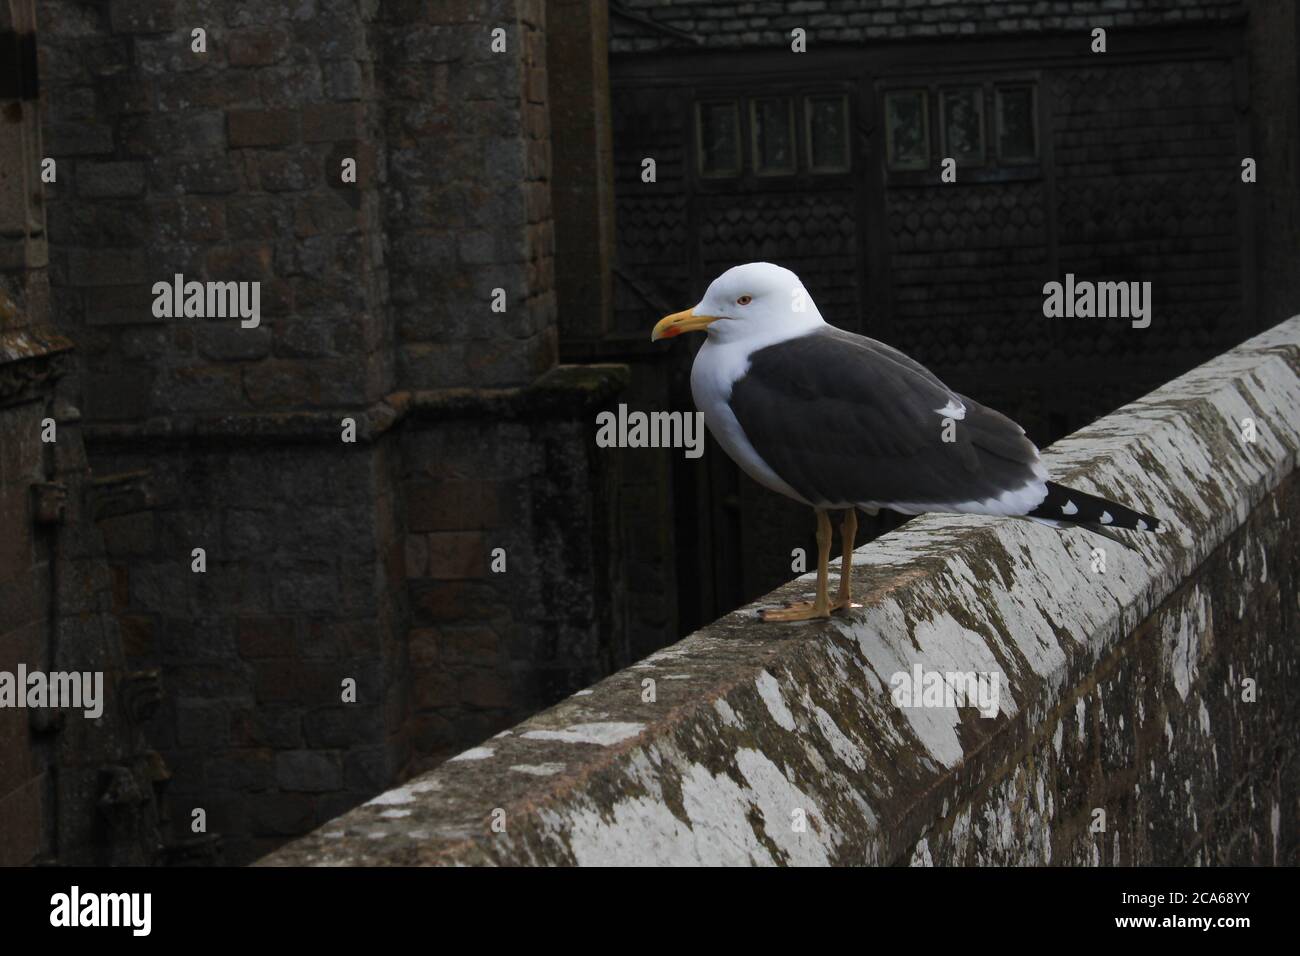 Mont-Saint-Michel / France - April 2020: A seagull is sitting on the ancient wall of Mont-Saint-Michel Abbey Stock Photo